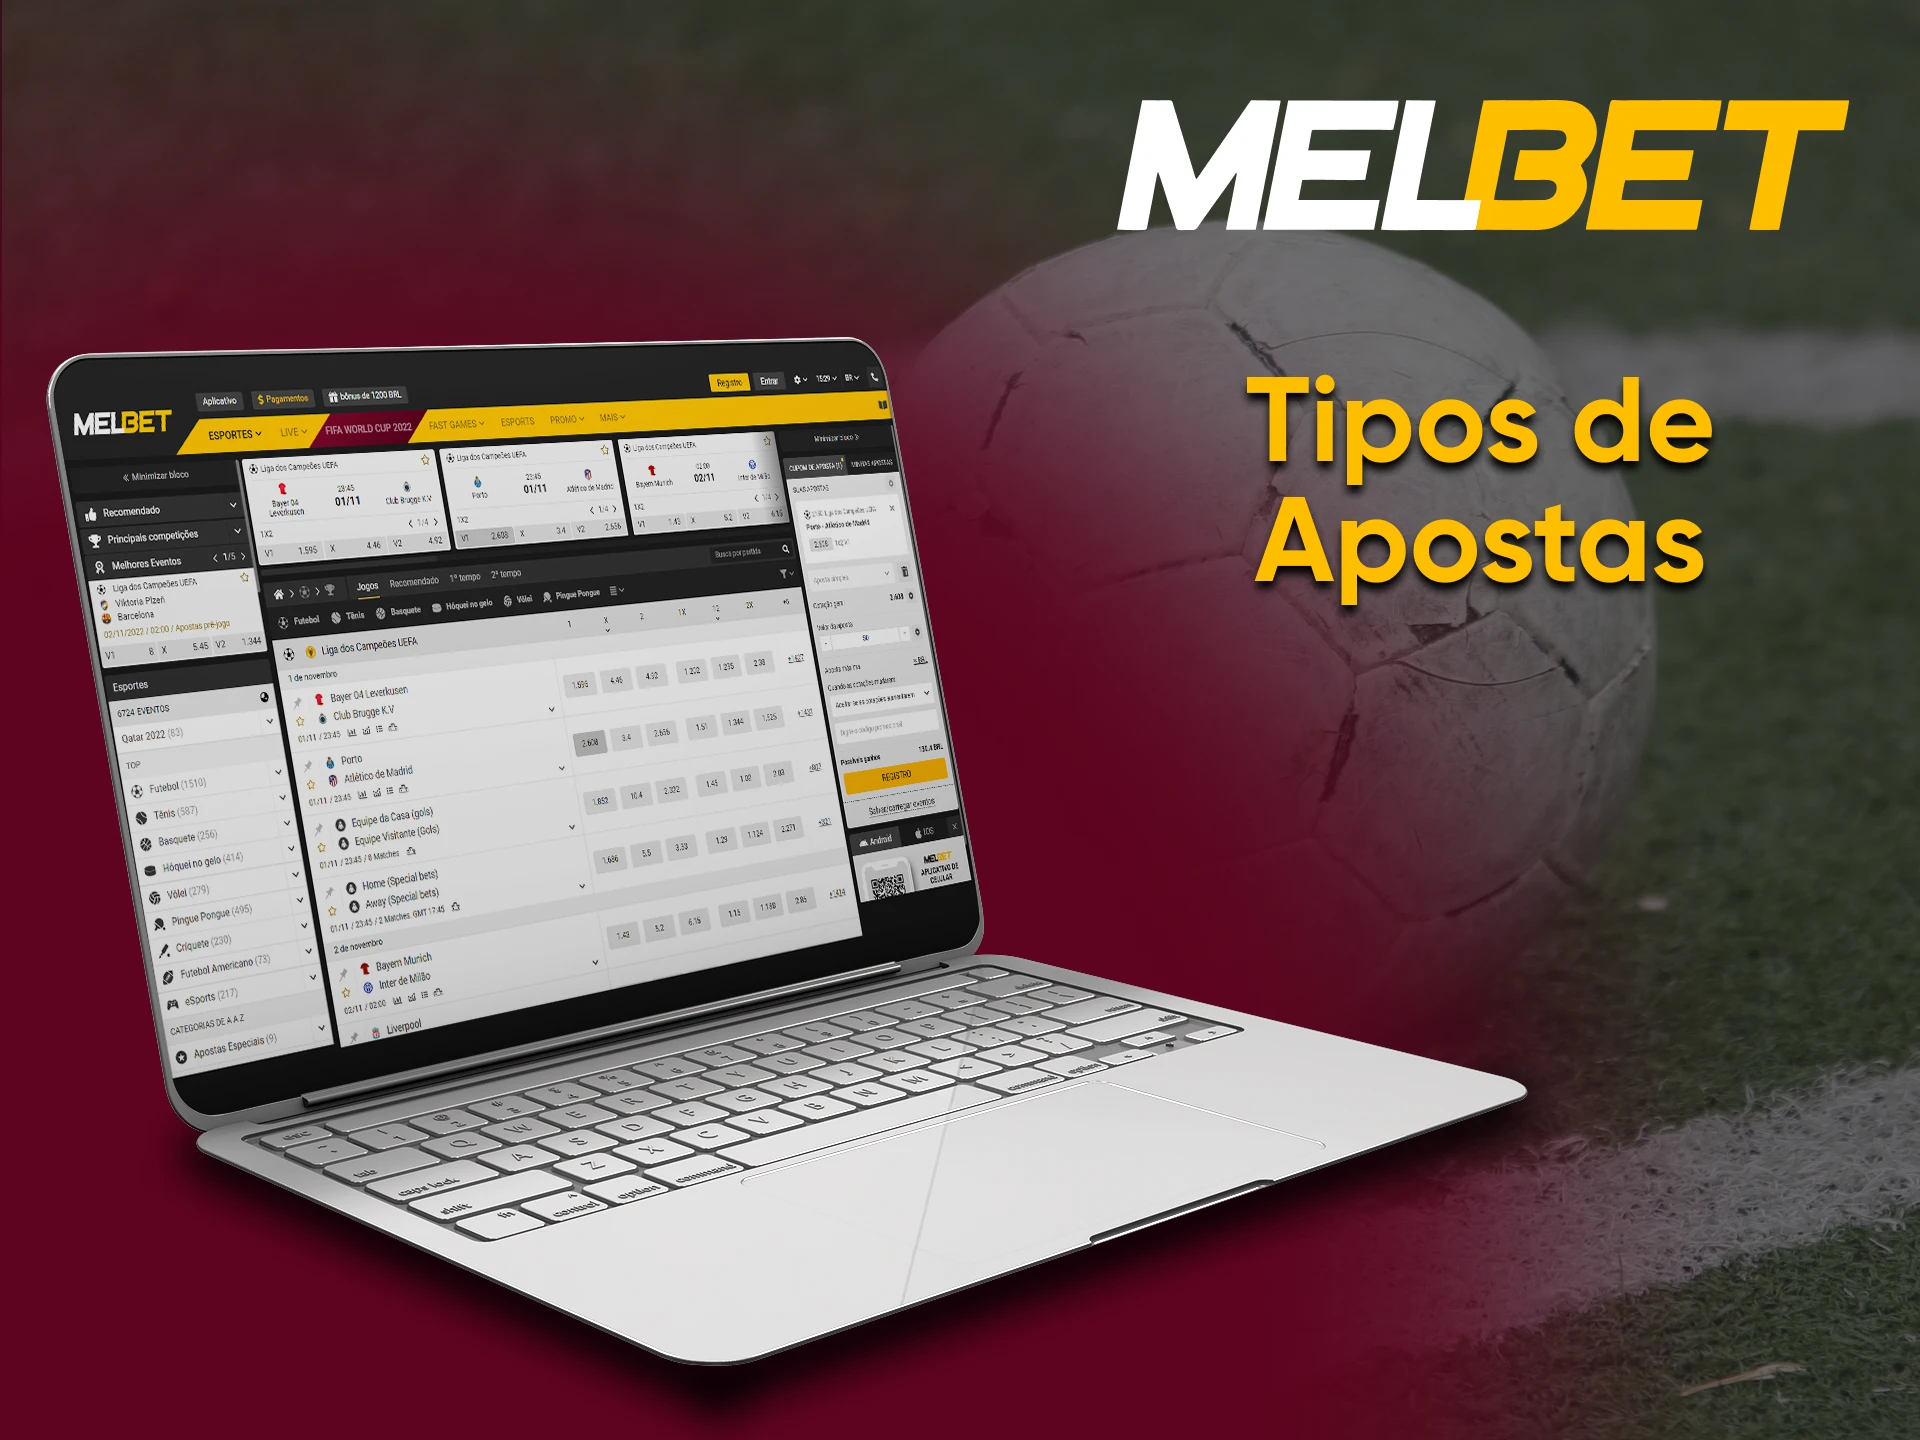 At Melbet, you can place different types of bets.